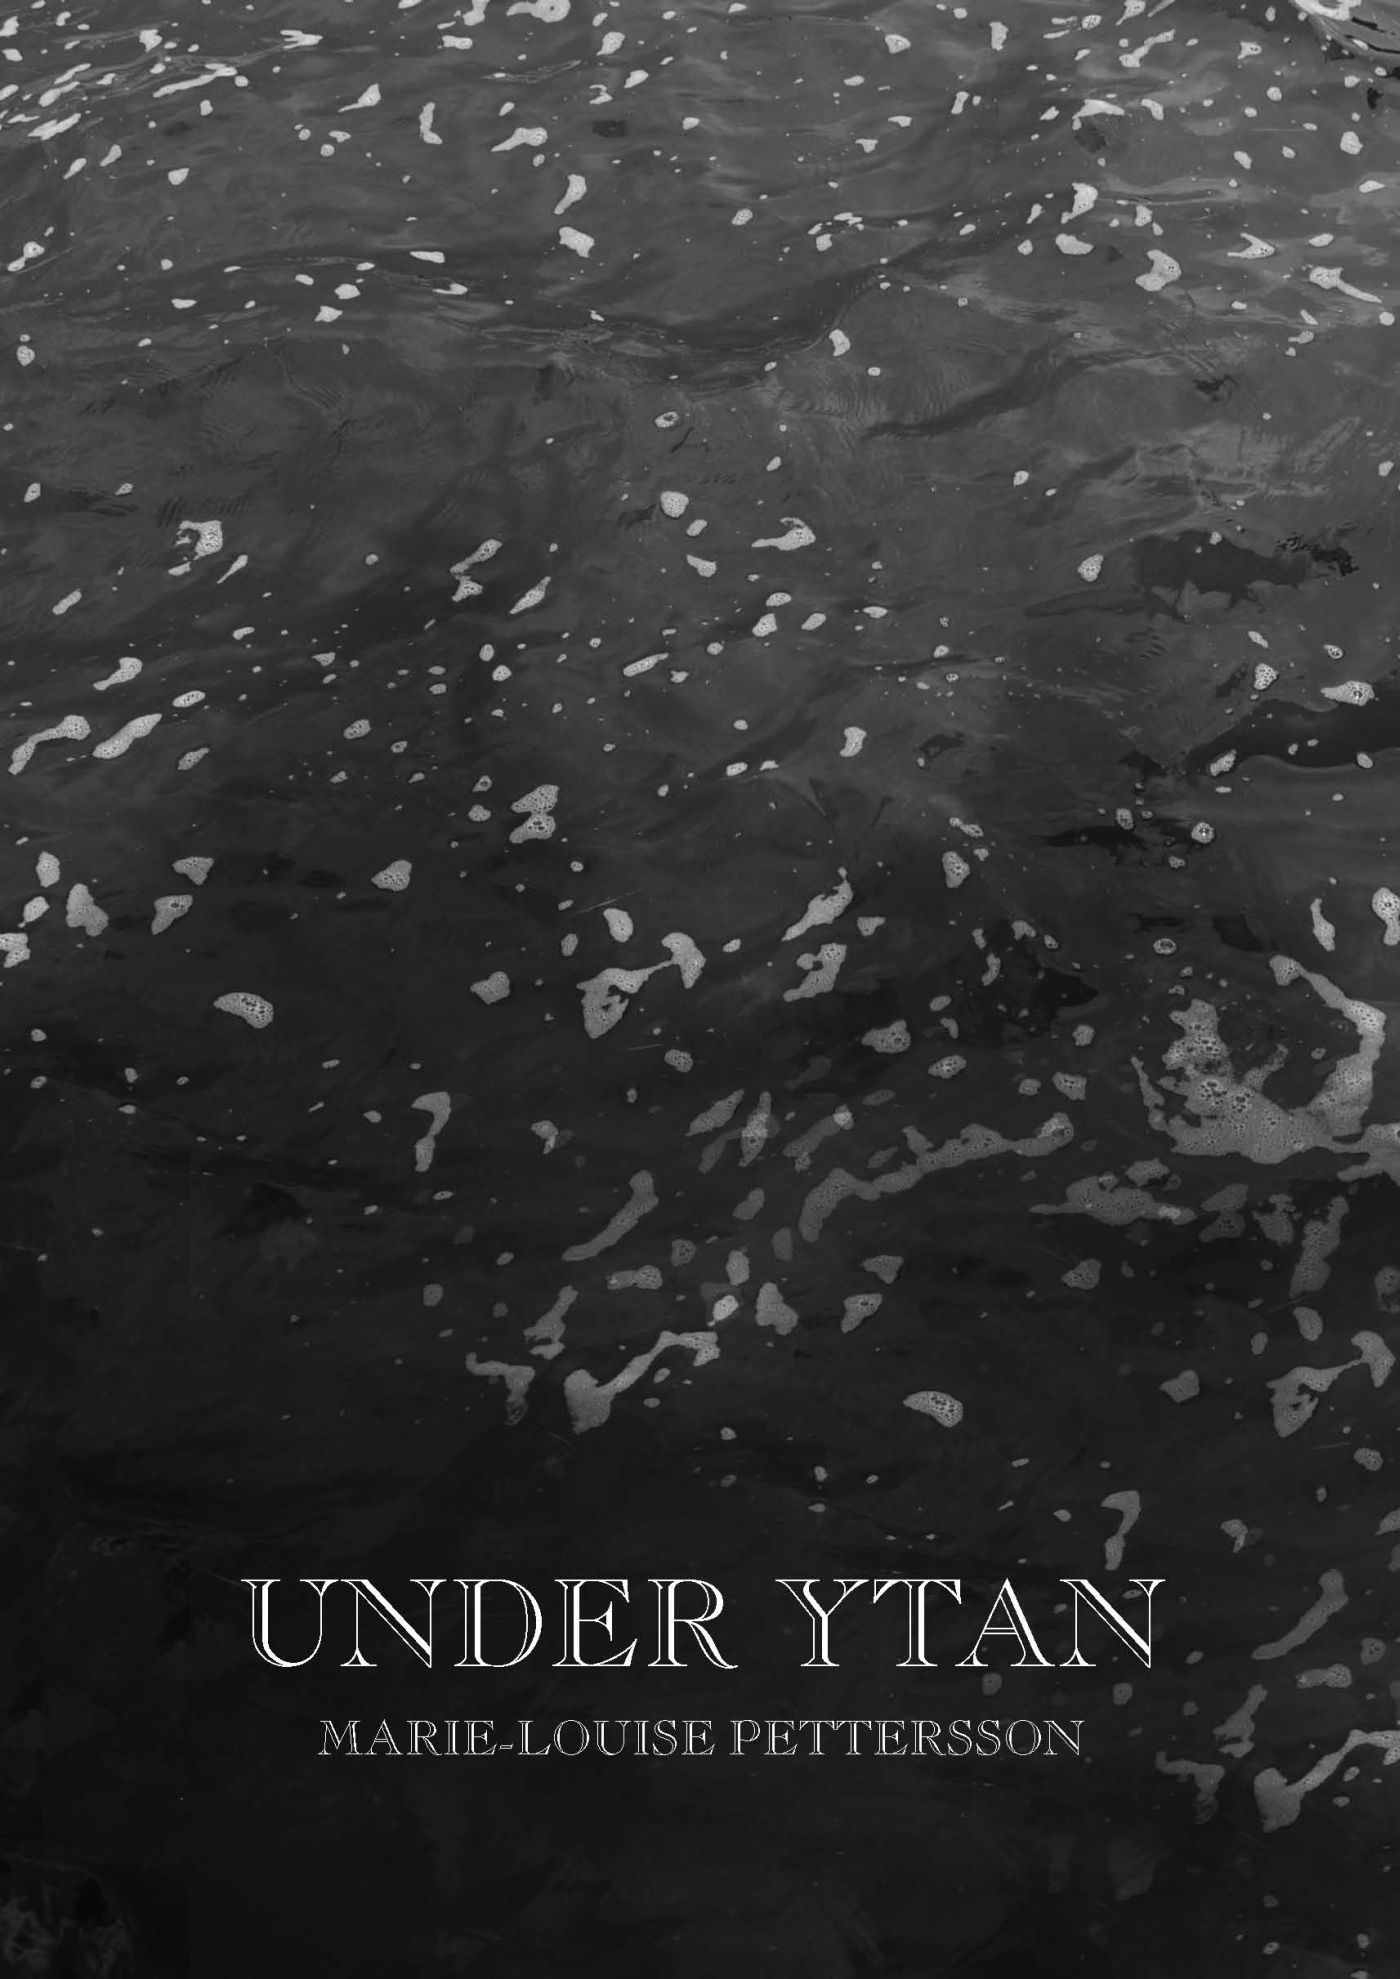 Under ytan, eBook by Marie-Louise Pettersson